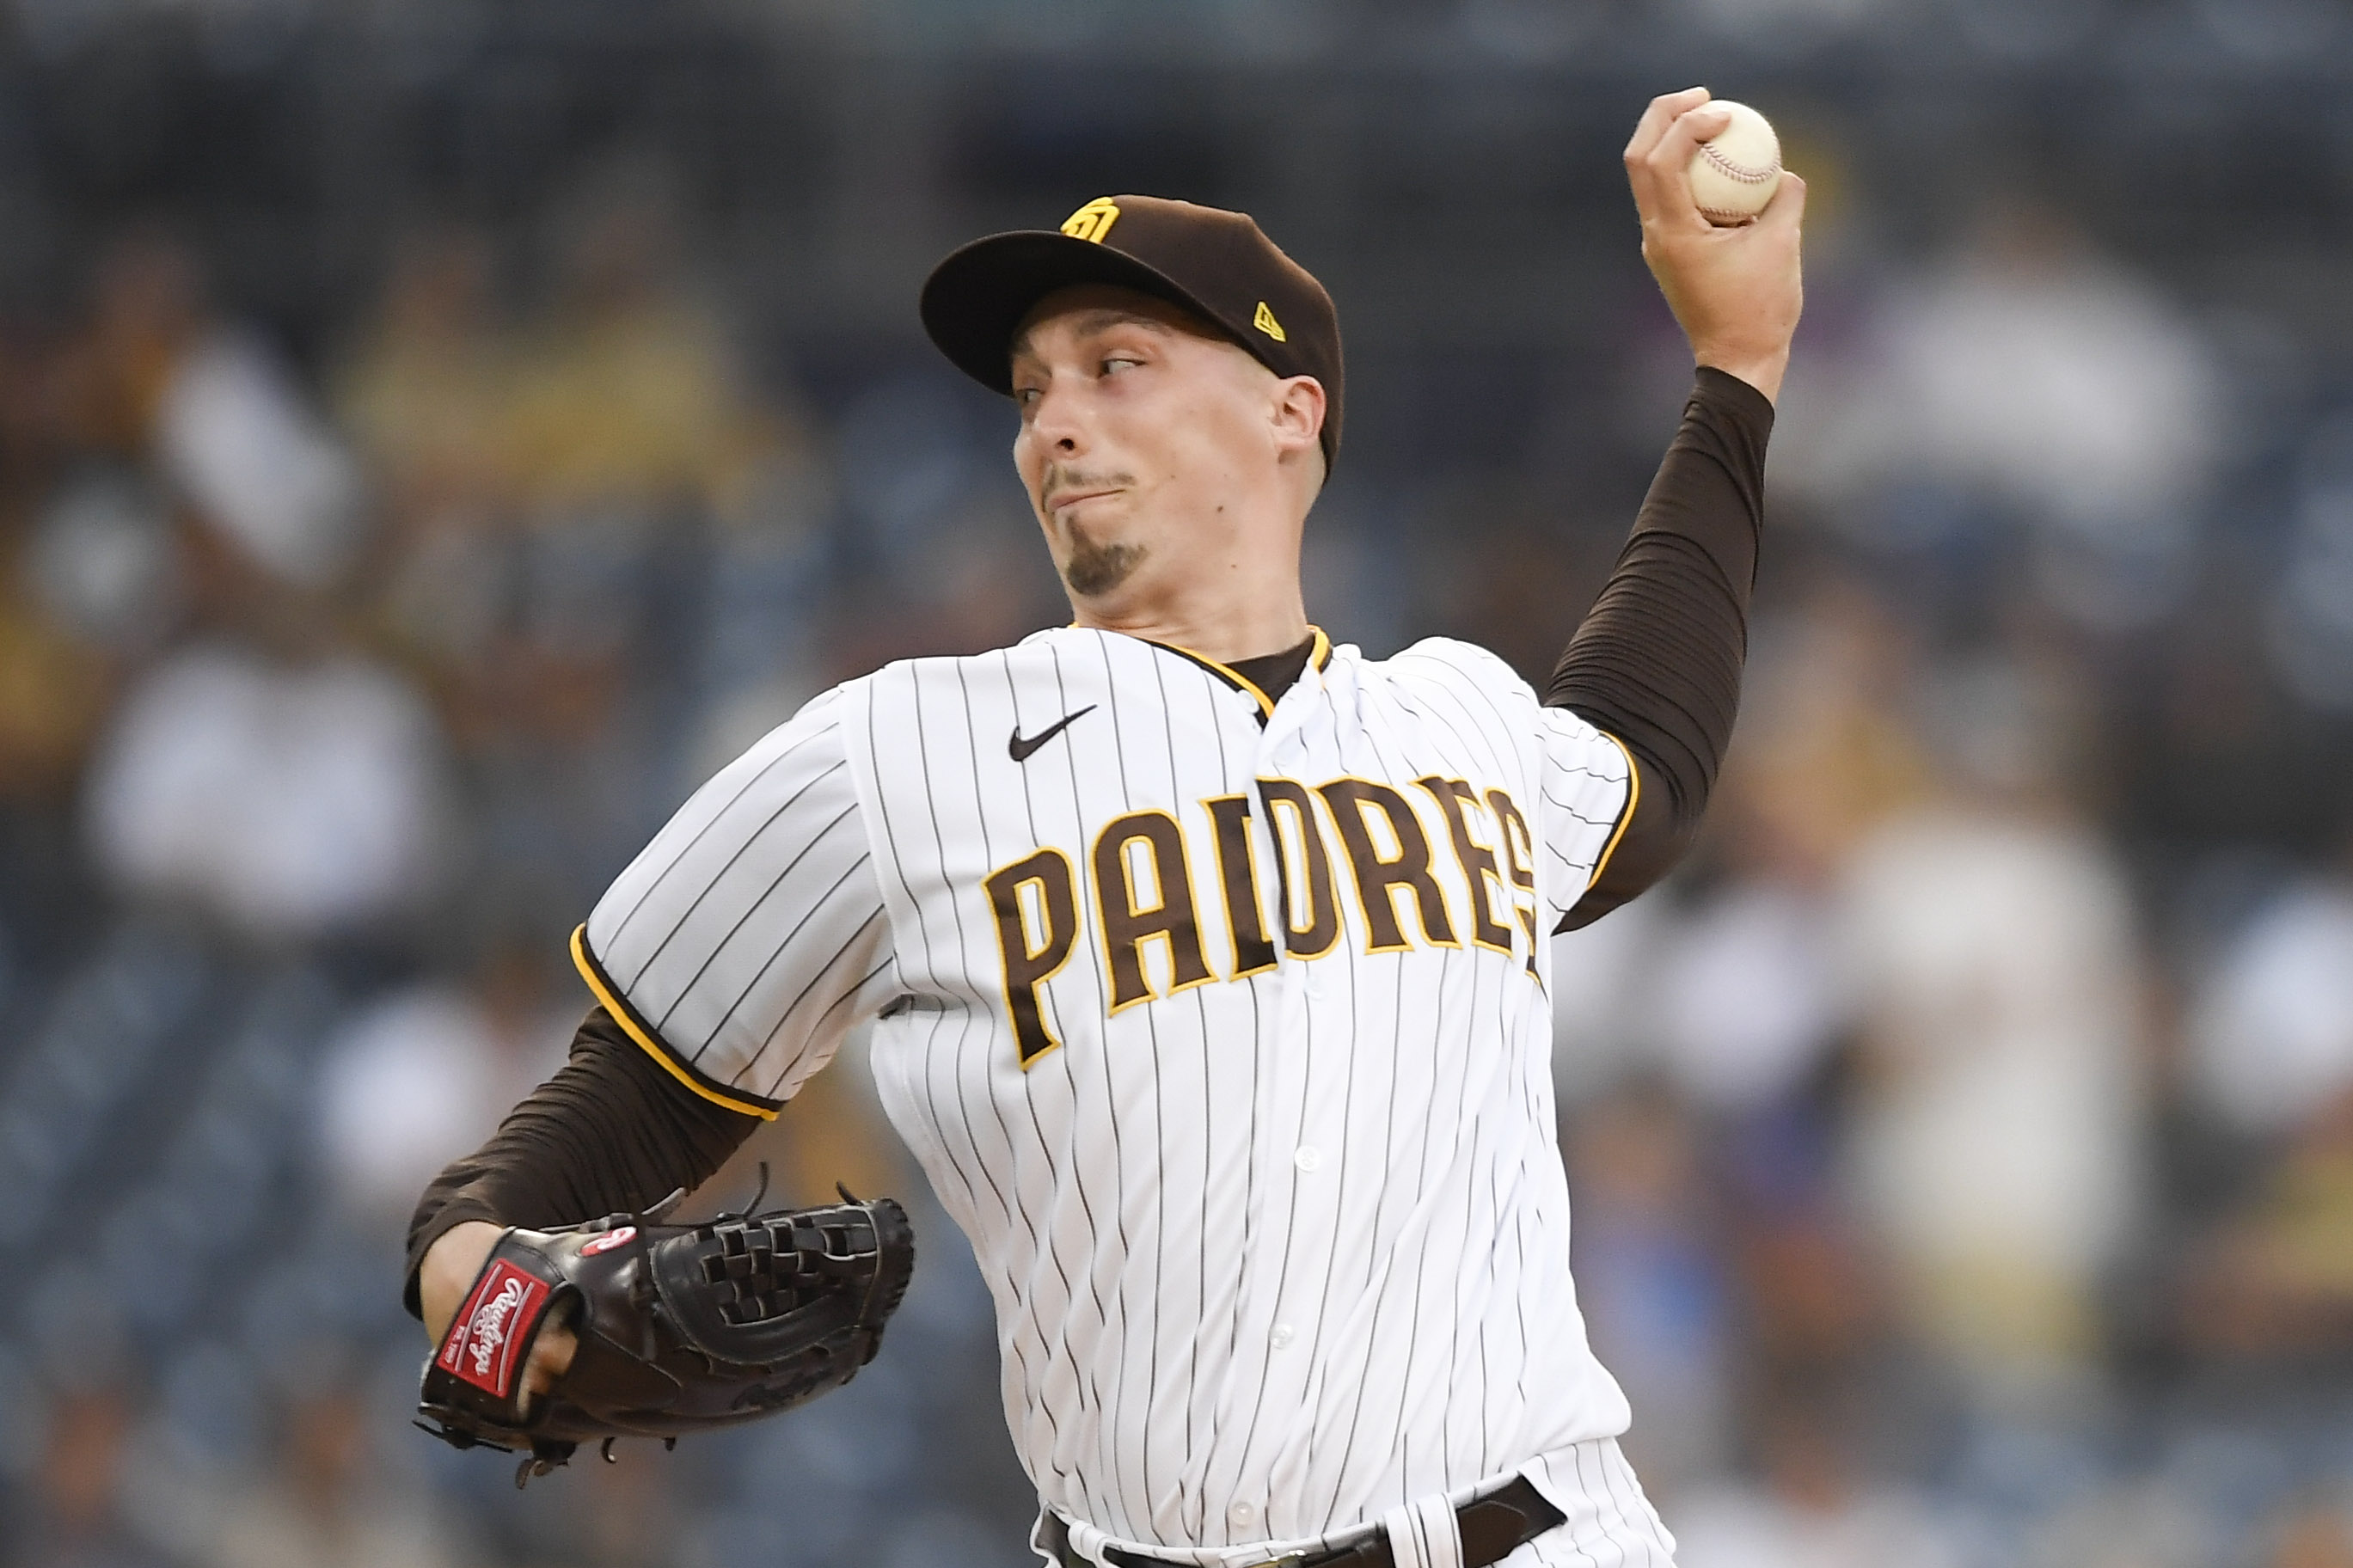 Padres shut out as Jacob deGrom dazzles